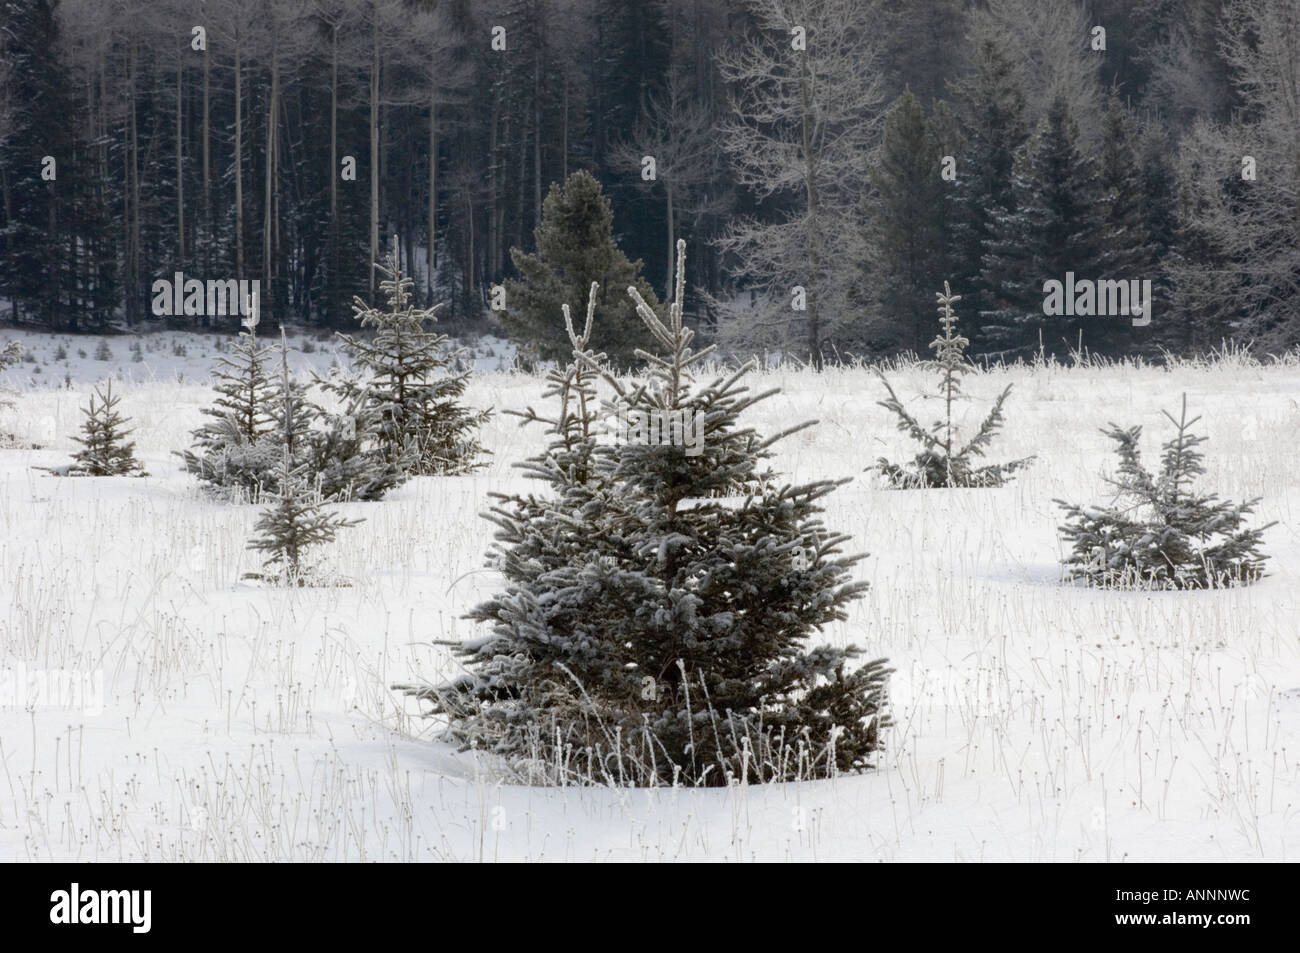 Spruce trees and fresh snow in meadow Banff National Park, Alberta, Canada Stock Photo